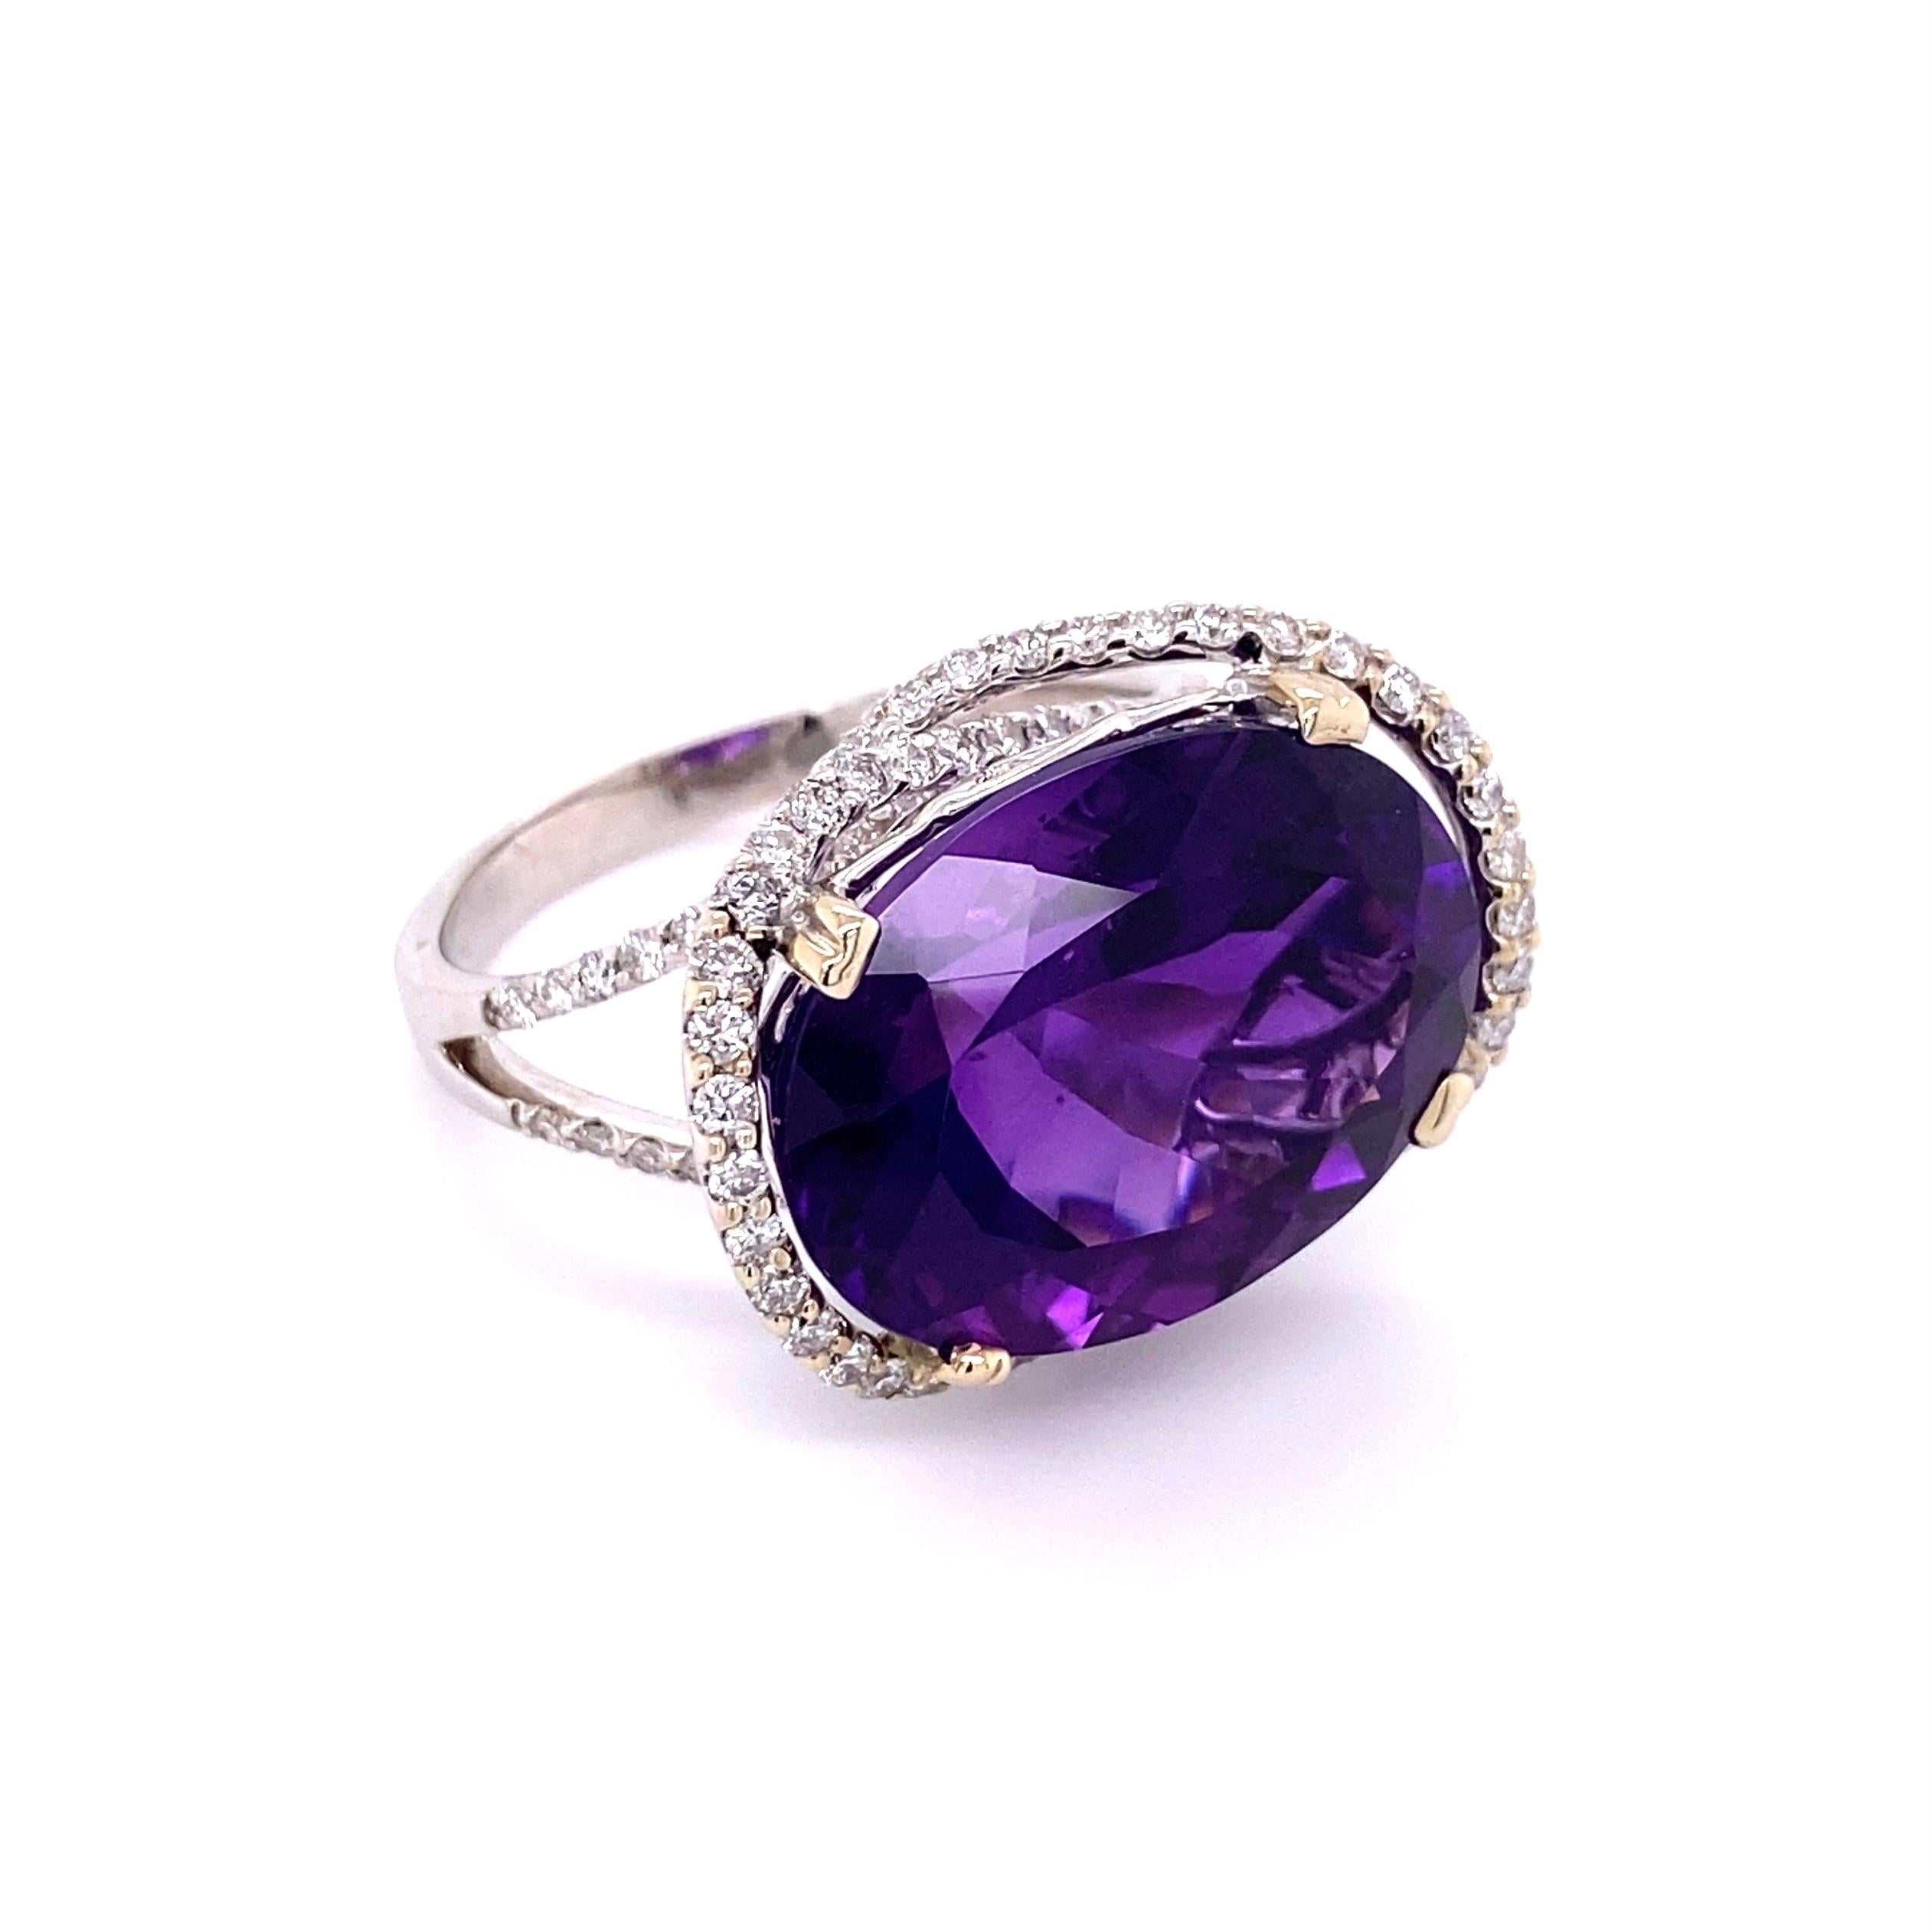 Simply Beautiful! Finely detailed Topaz and Diamond Art Deco Revival Cocktail Ring. Centering a Hand set securely nestled 17.50 Siberian Amethyst surrounded by Round Brilliant-Cut Diamonds, weighing approx. 1.52tcw including sides and on split